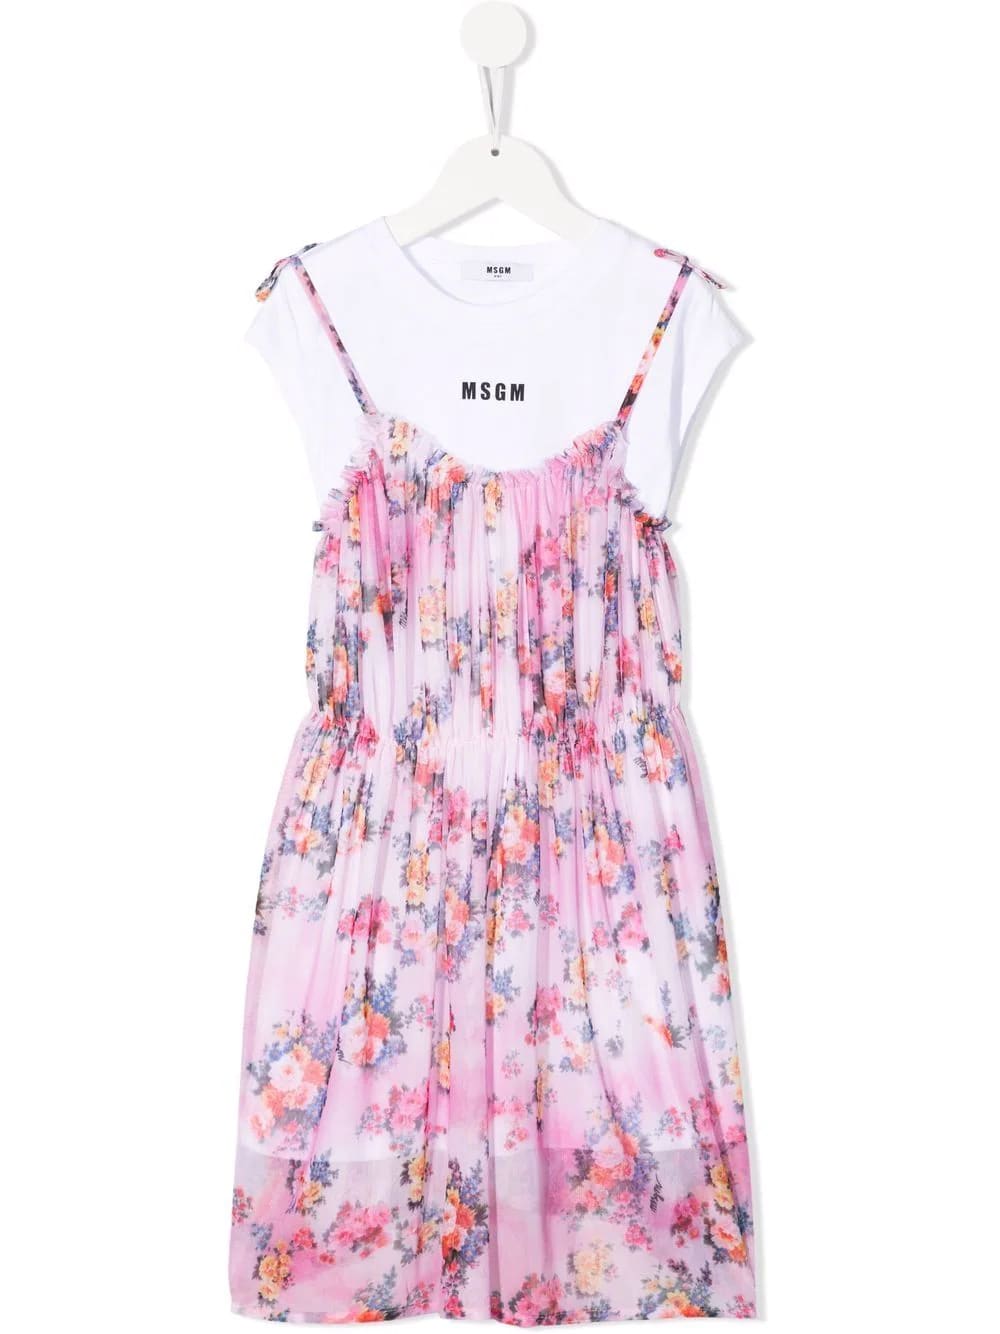 MSGM Kids Pink Floral Dress With White T-shirt